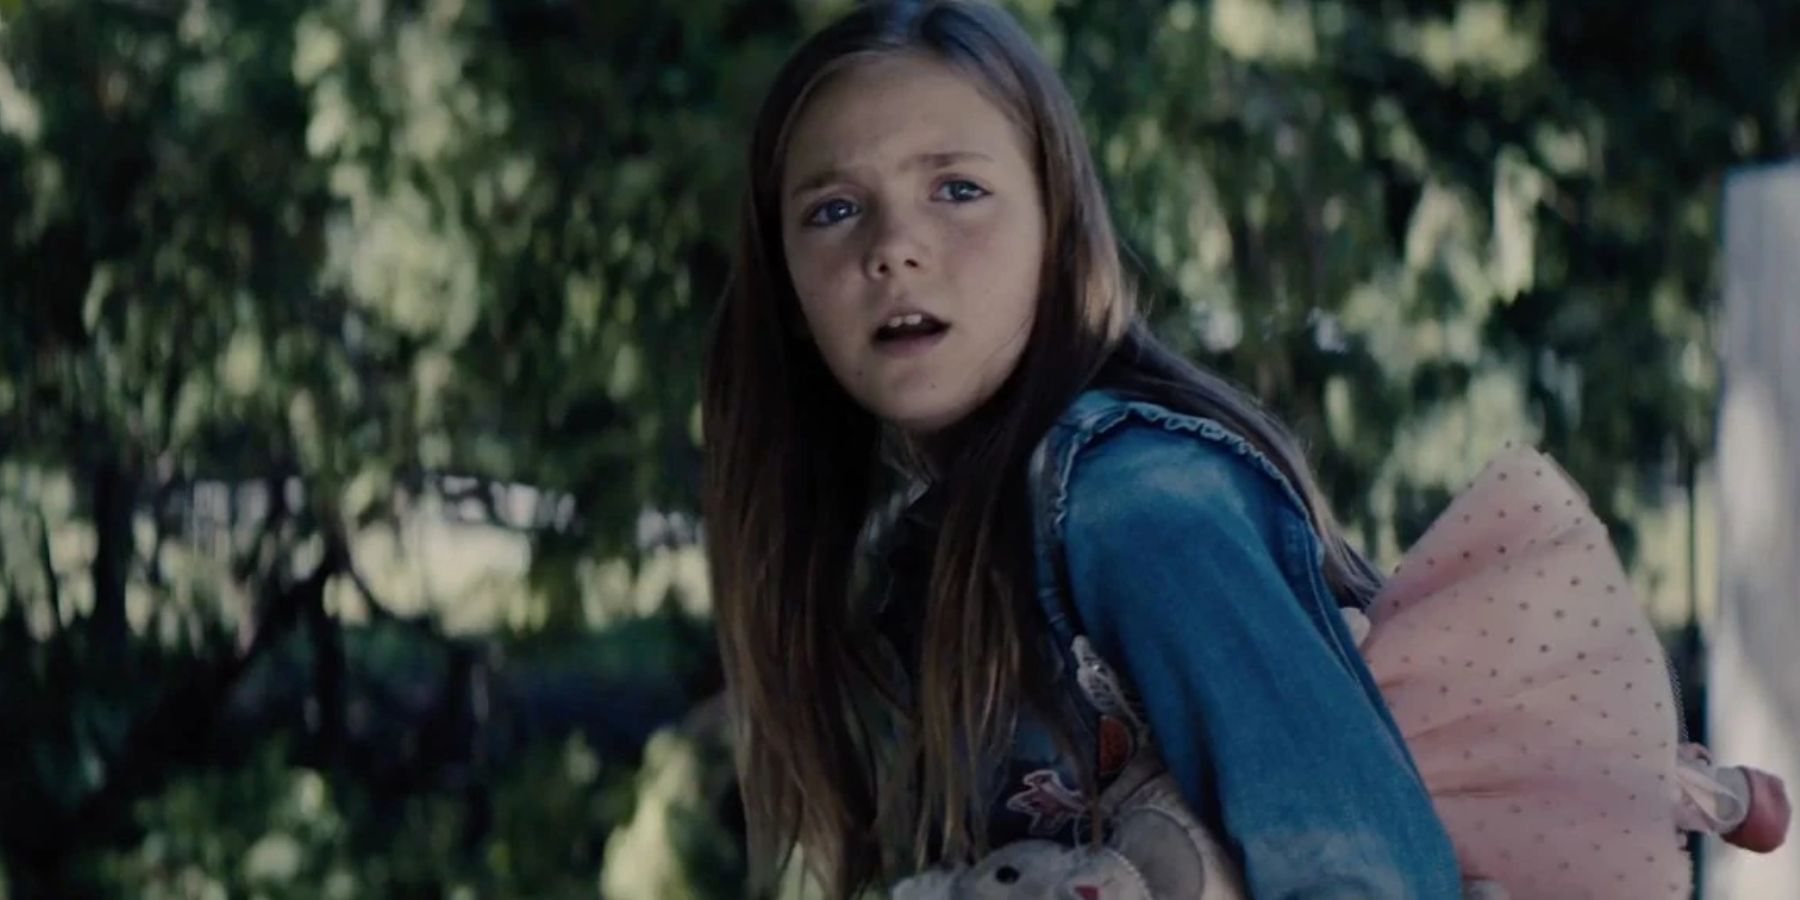 Ellie Creed in Pet Sematary (2019)